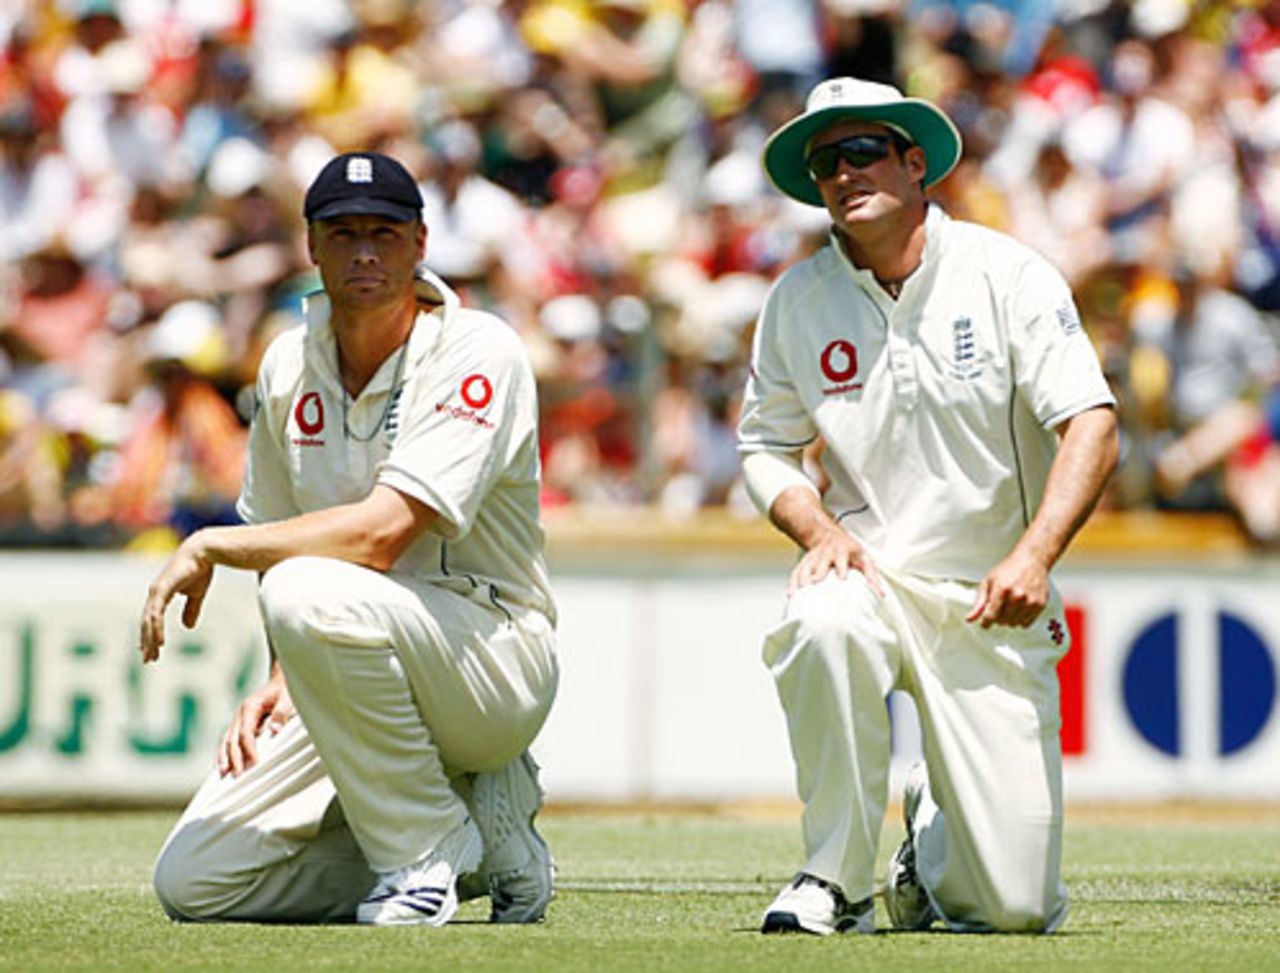 Andrew Flintoff and Andrew Strauss reflect on a near chance, Australia v England, 3rd Test, Perth, December 16, 2006